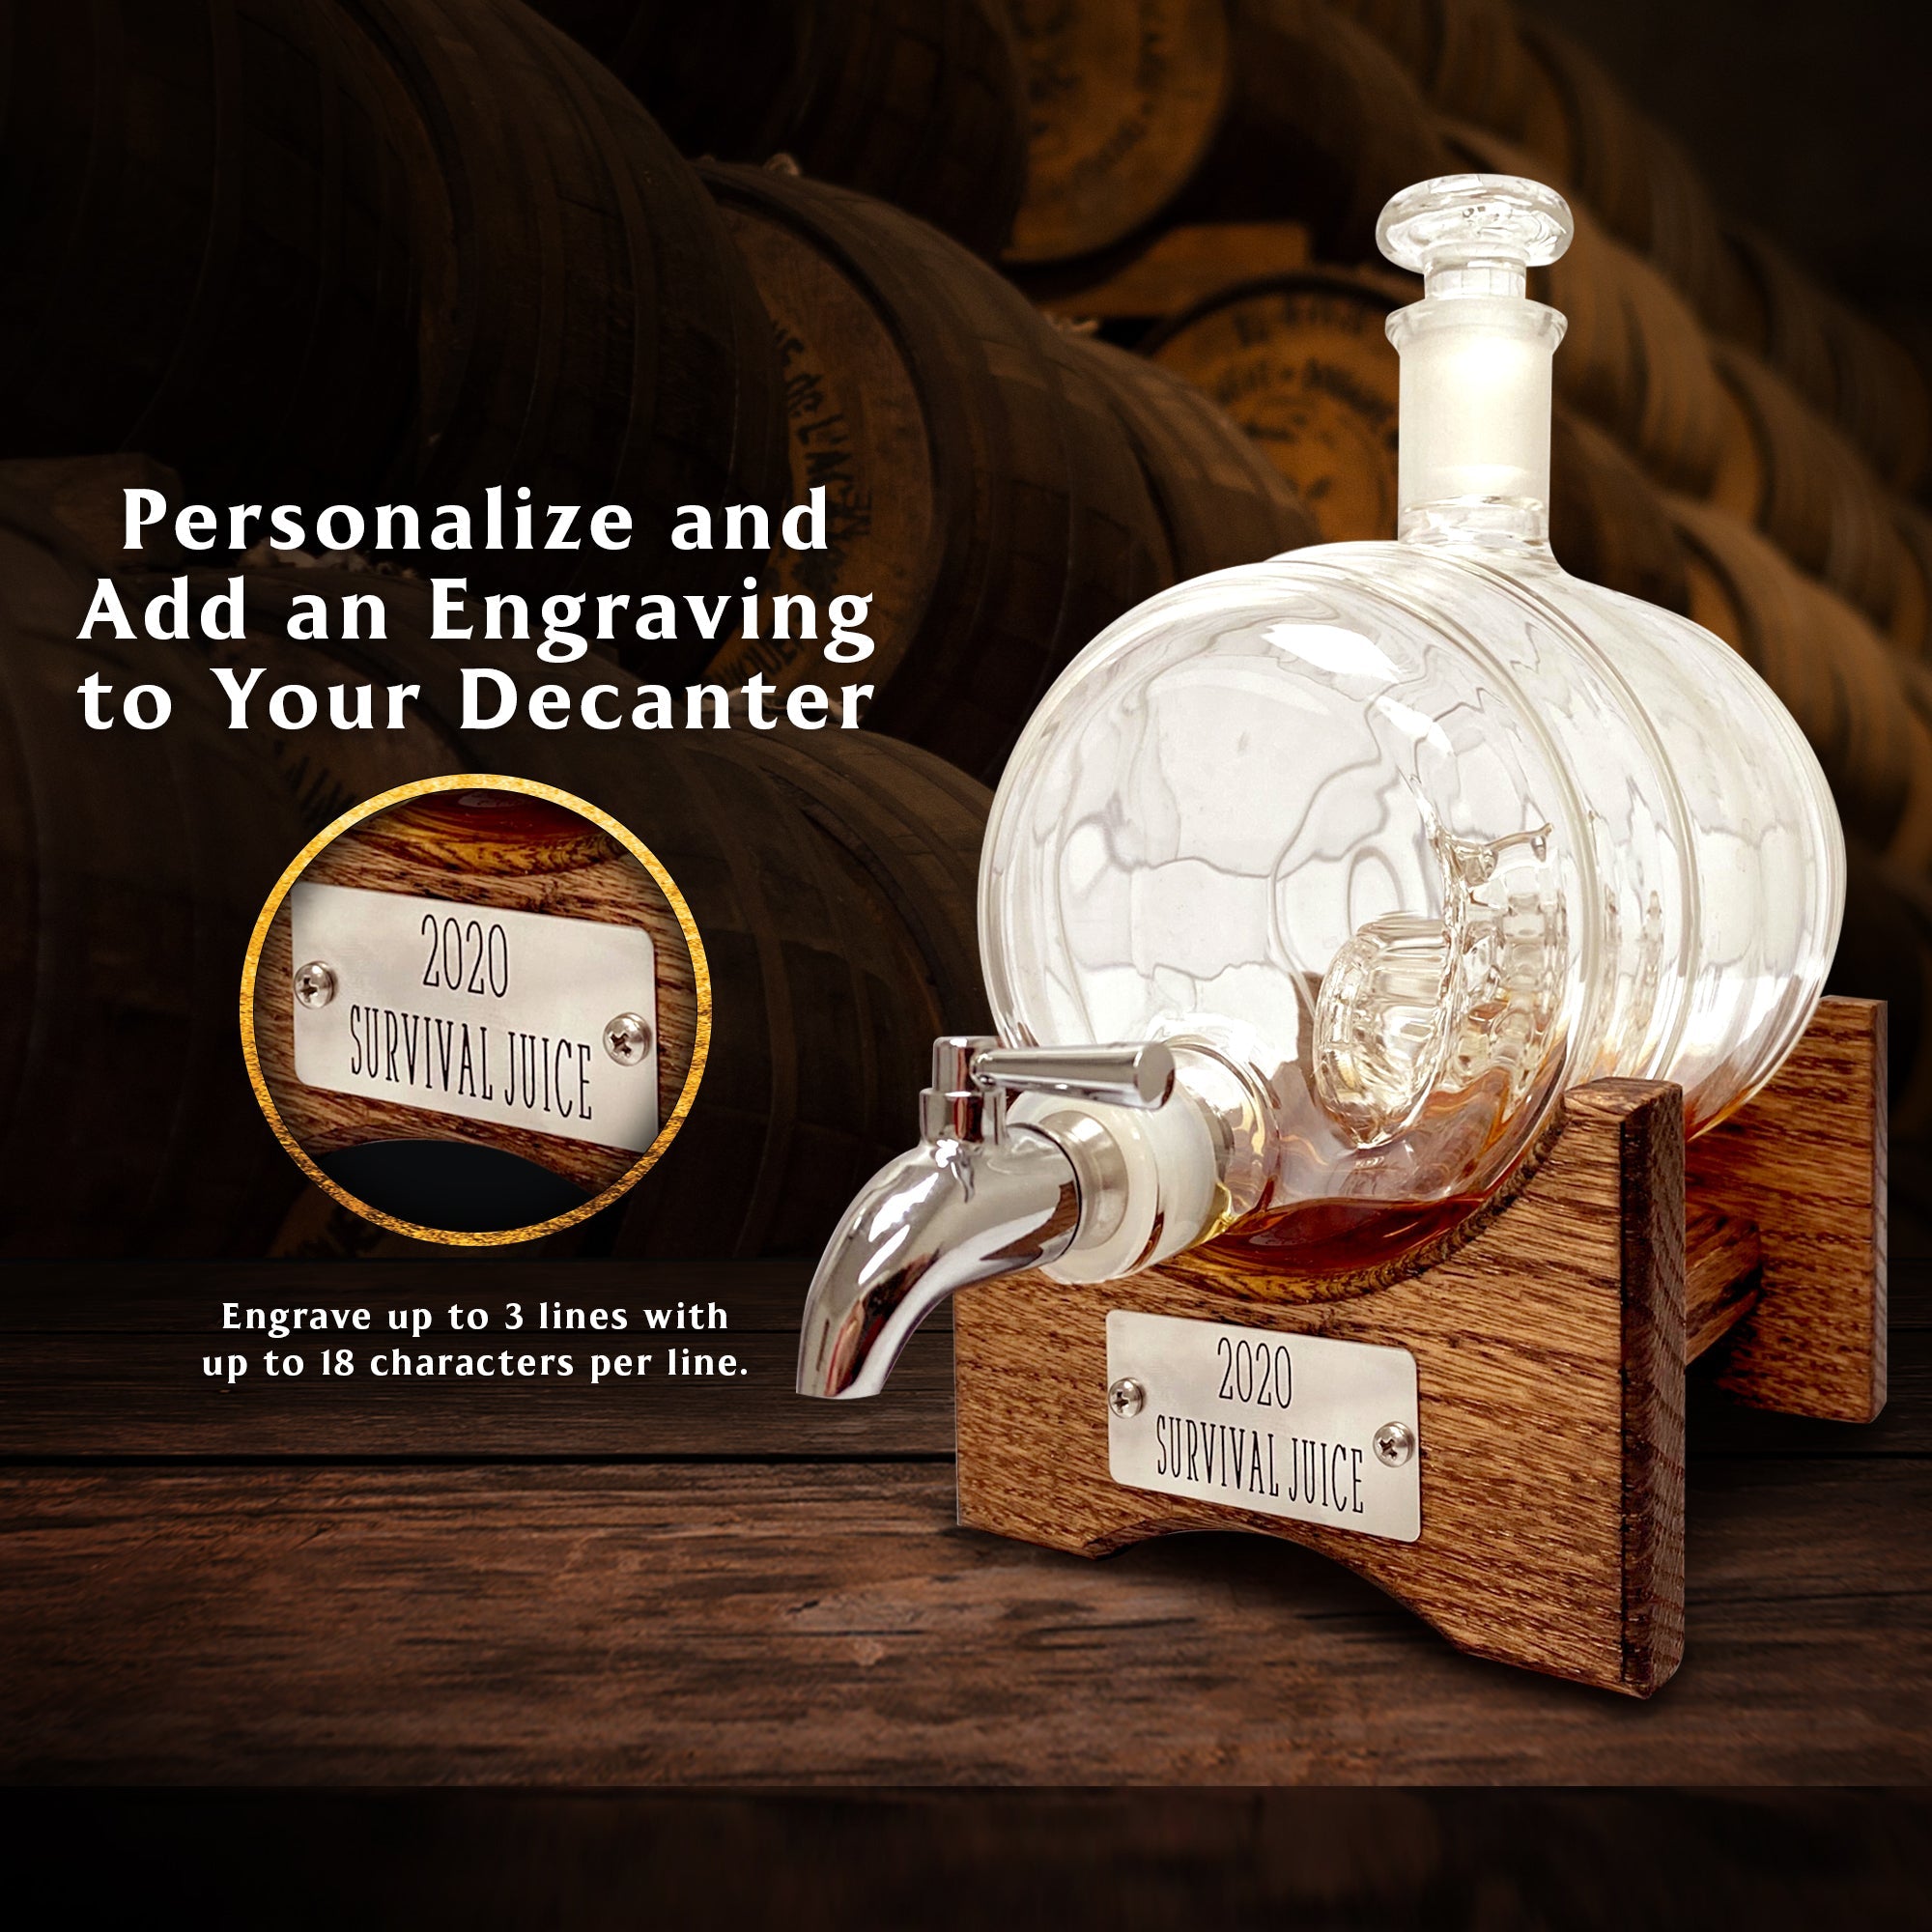 Decanter and engraved plaque